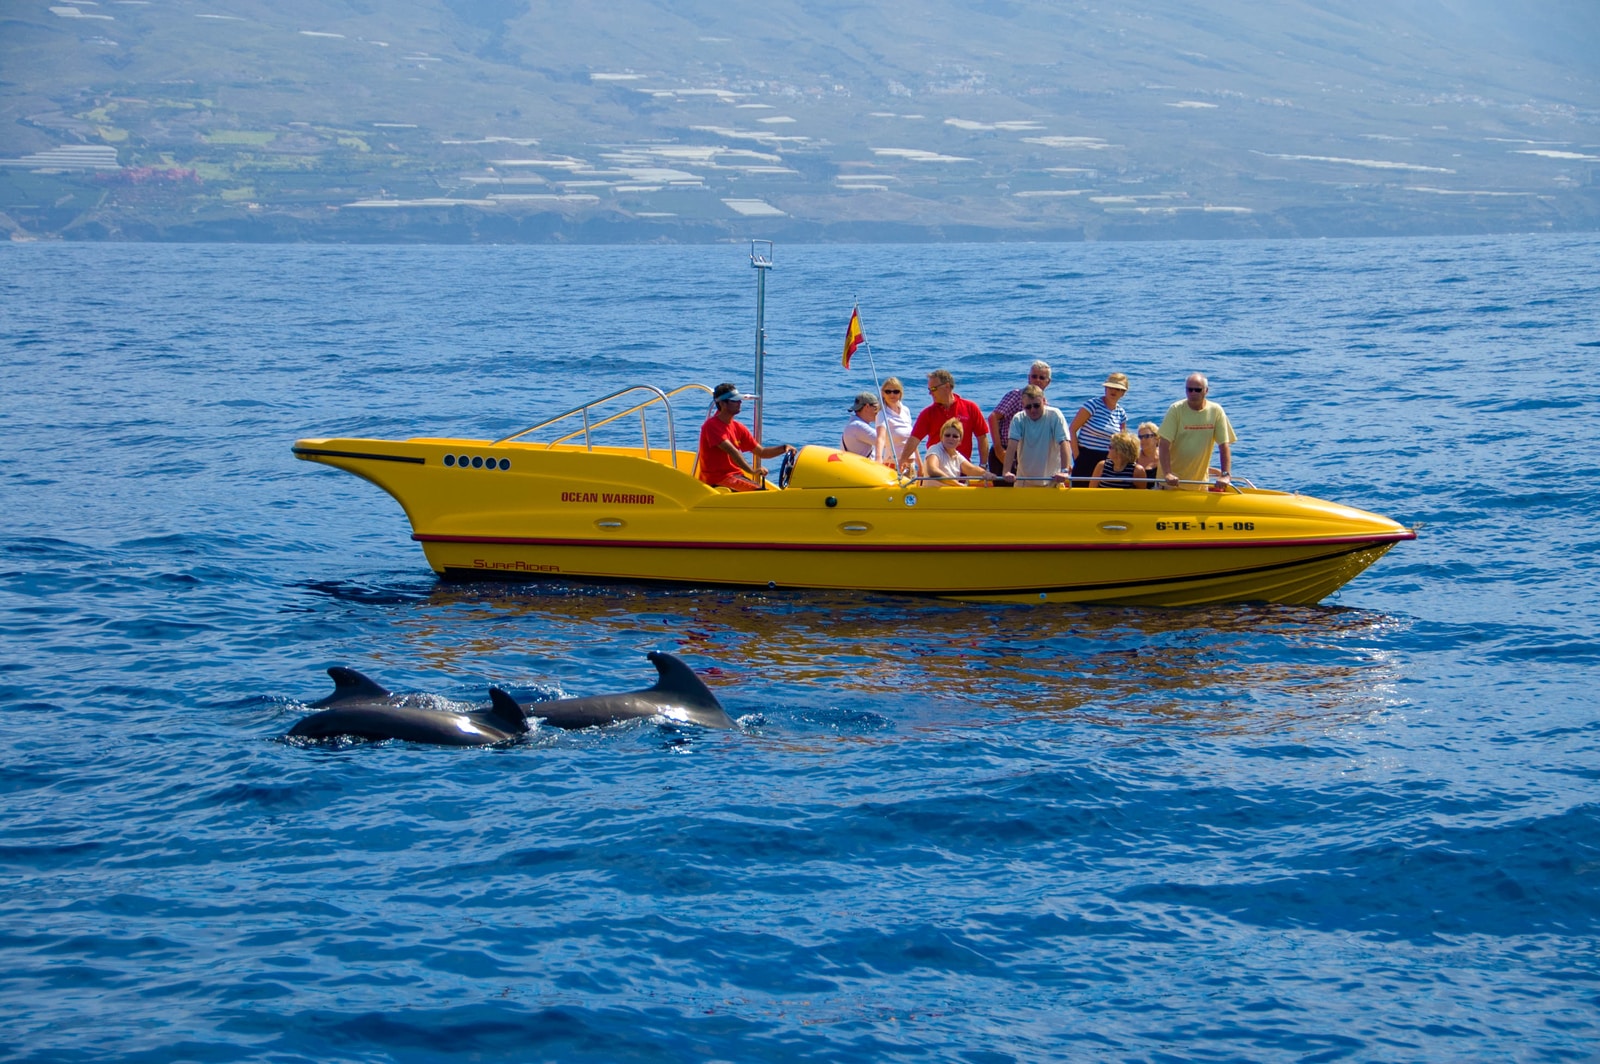 Whale-watching in Tenerife (Photo by Gustavo A. Pérez)